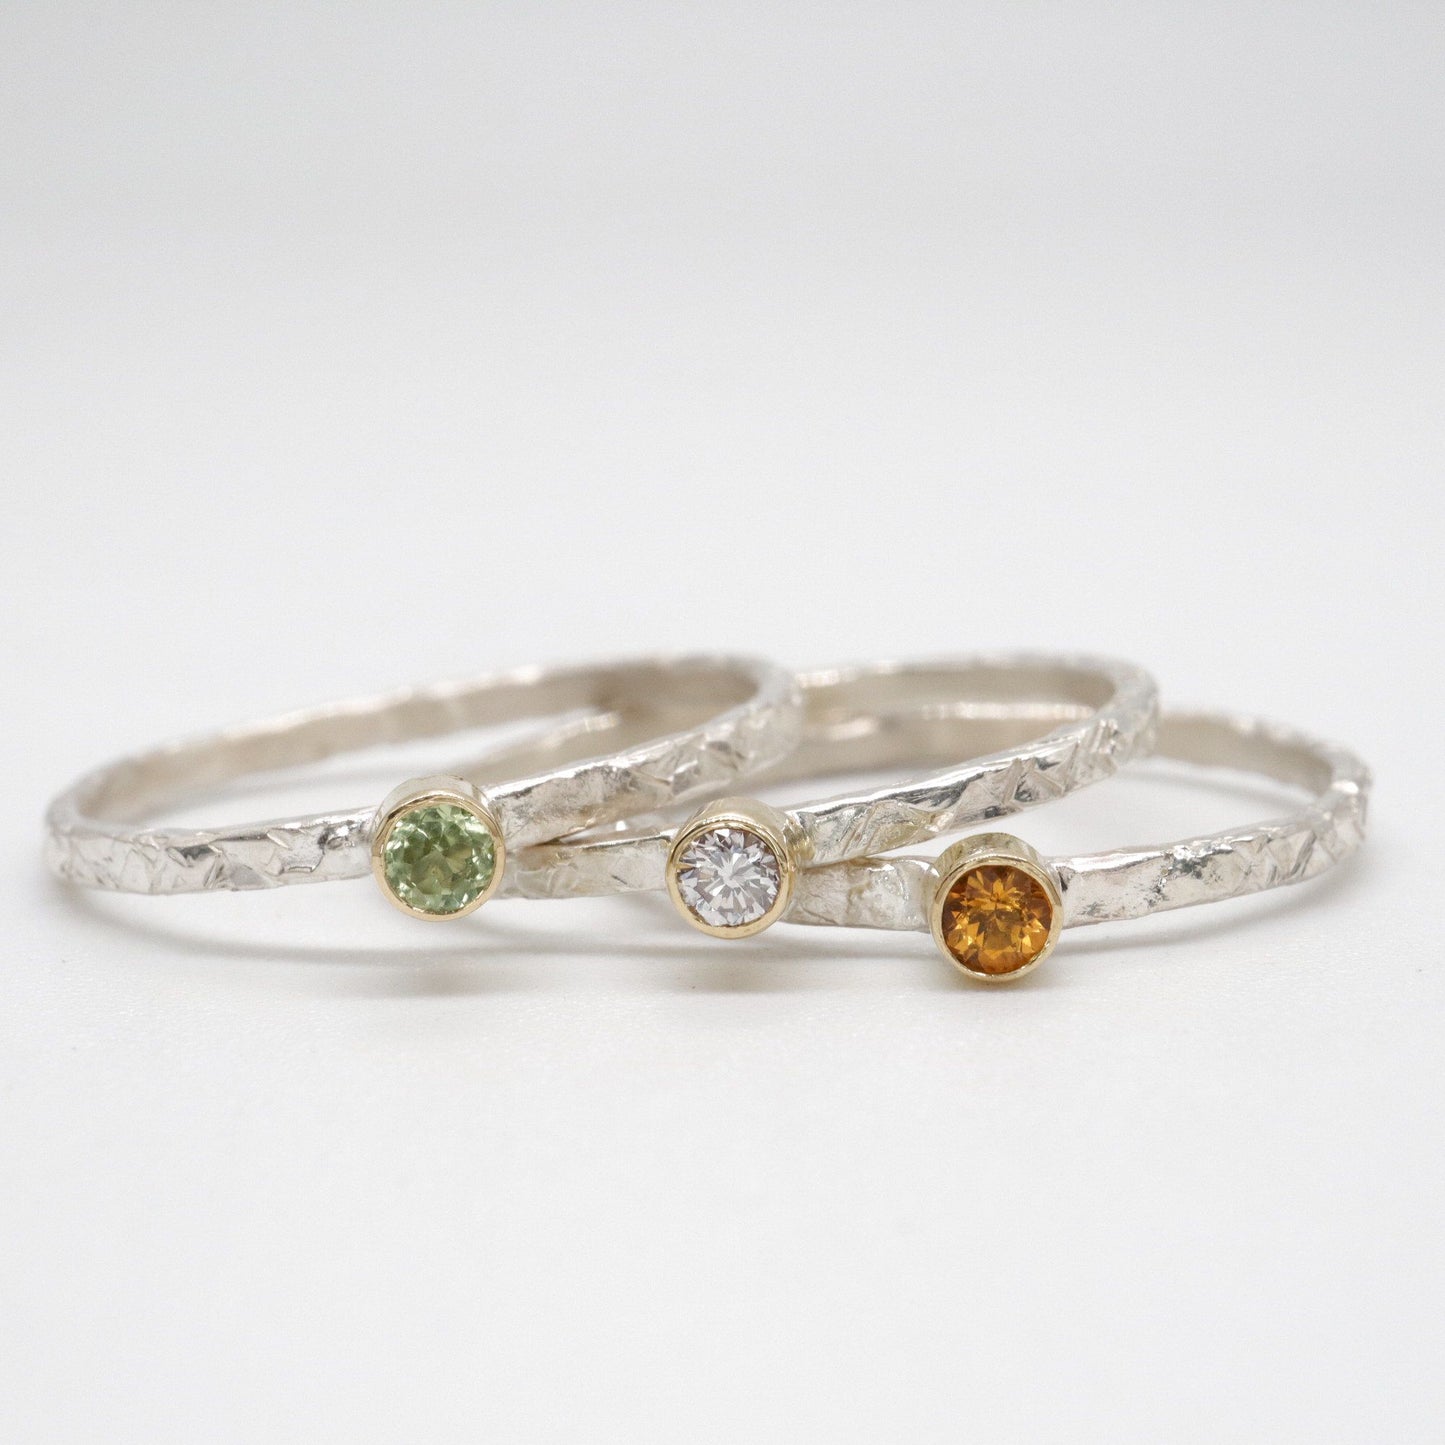 Ring set of three with peridot, diamond and citrine, Striding Edge stacking design in 18ct yellow gold and silver.